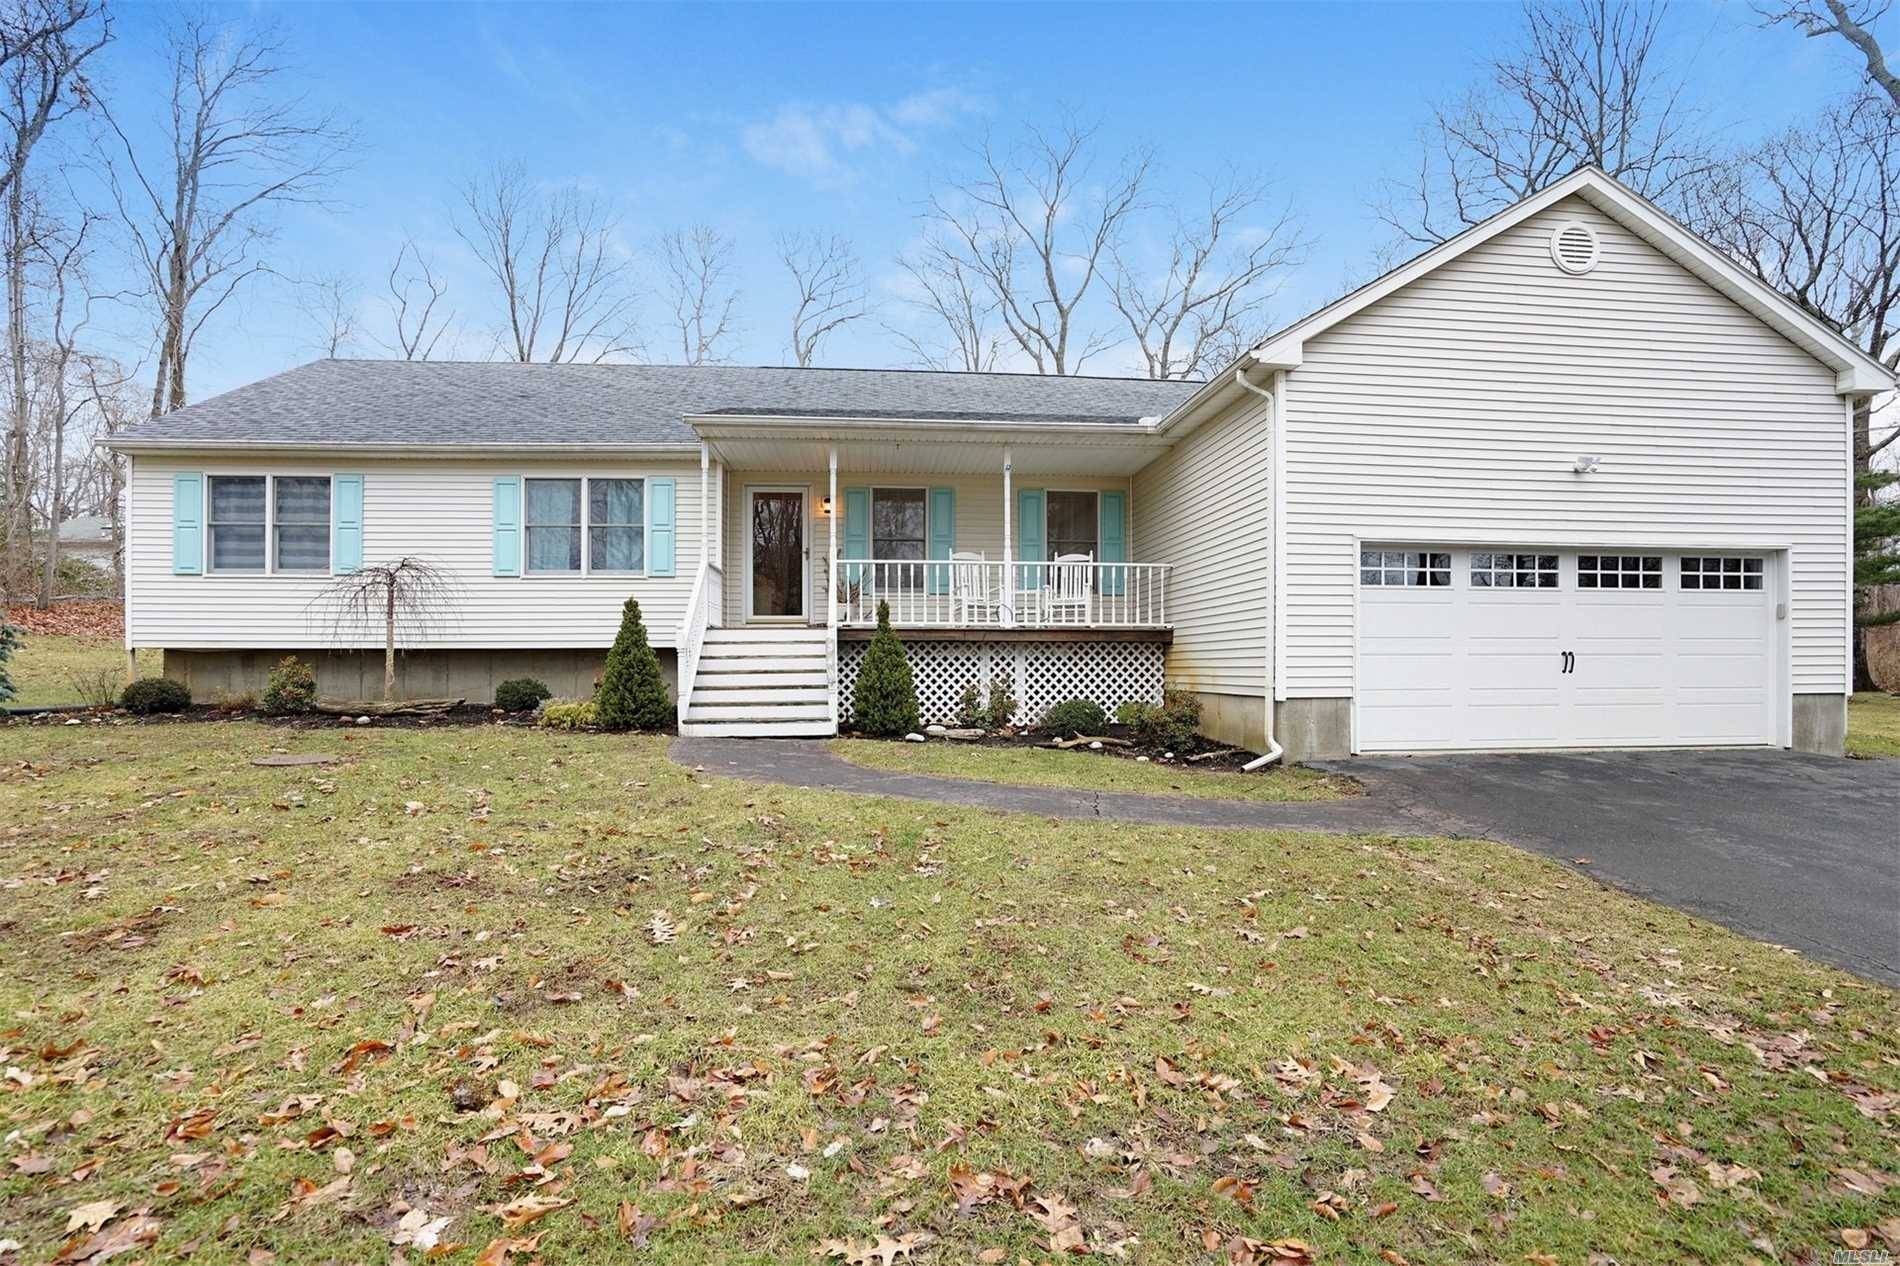 Newly Renovated 3 Bedroom/2 Bath Home With Family Room, Deck And A Memorable Community Long Island Sound Beach Less Than 1/2 Mile Away.